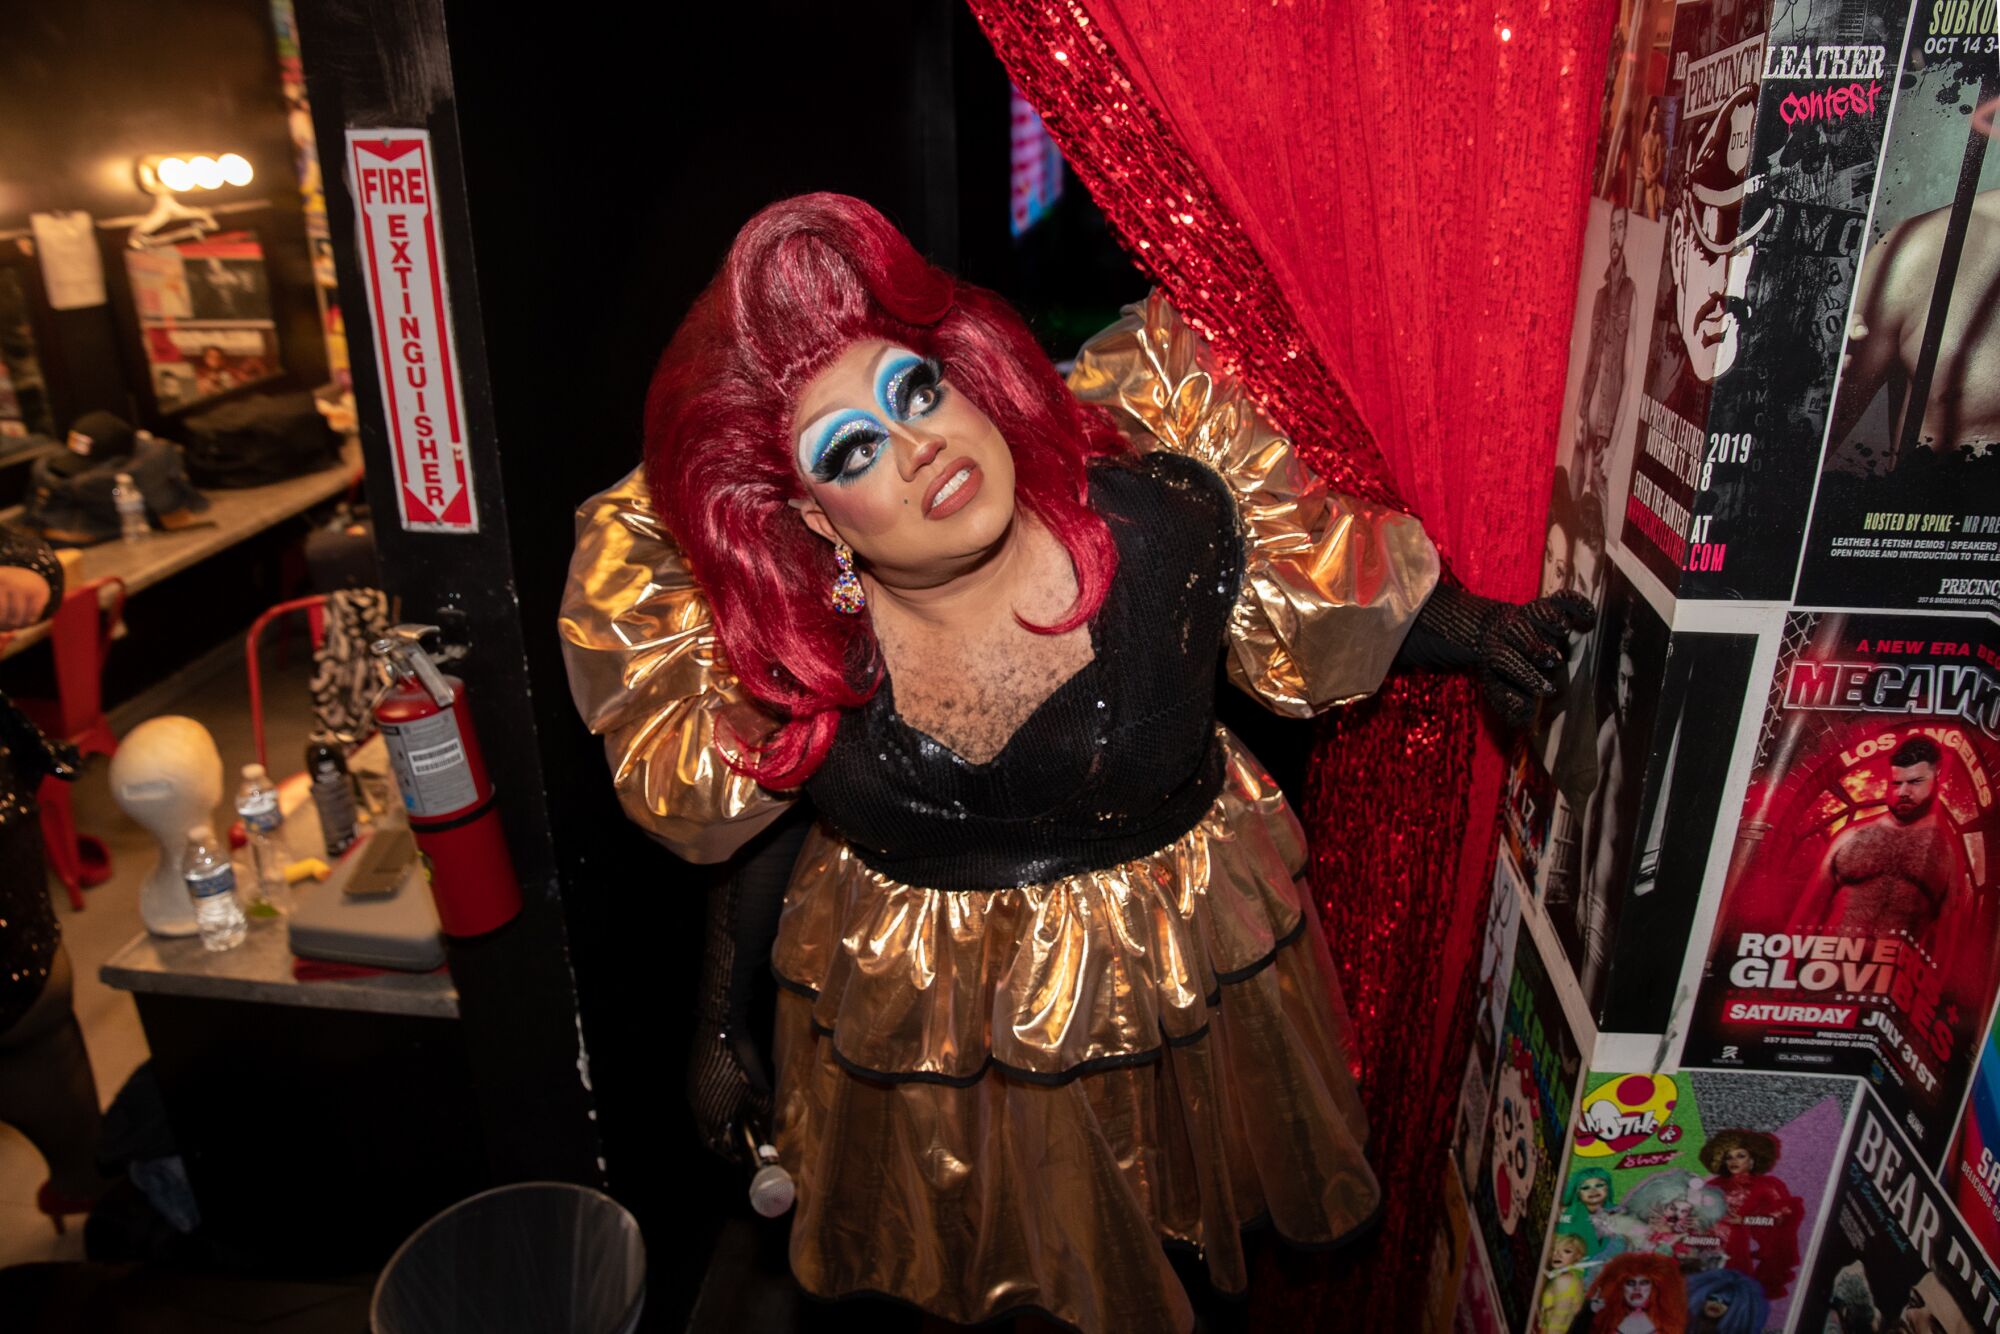 A drag queen in black and gold, red wig and plentiful blue eye makeup looks up